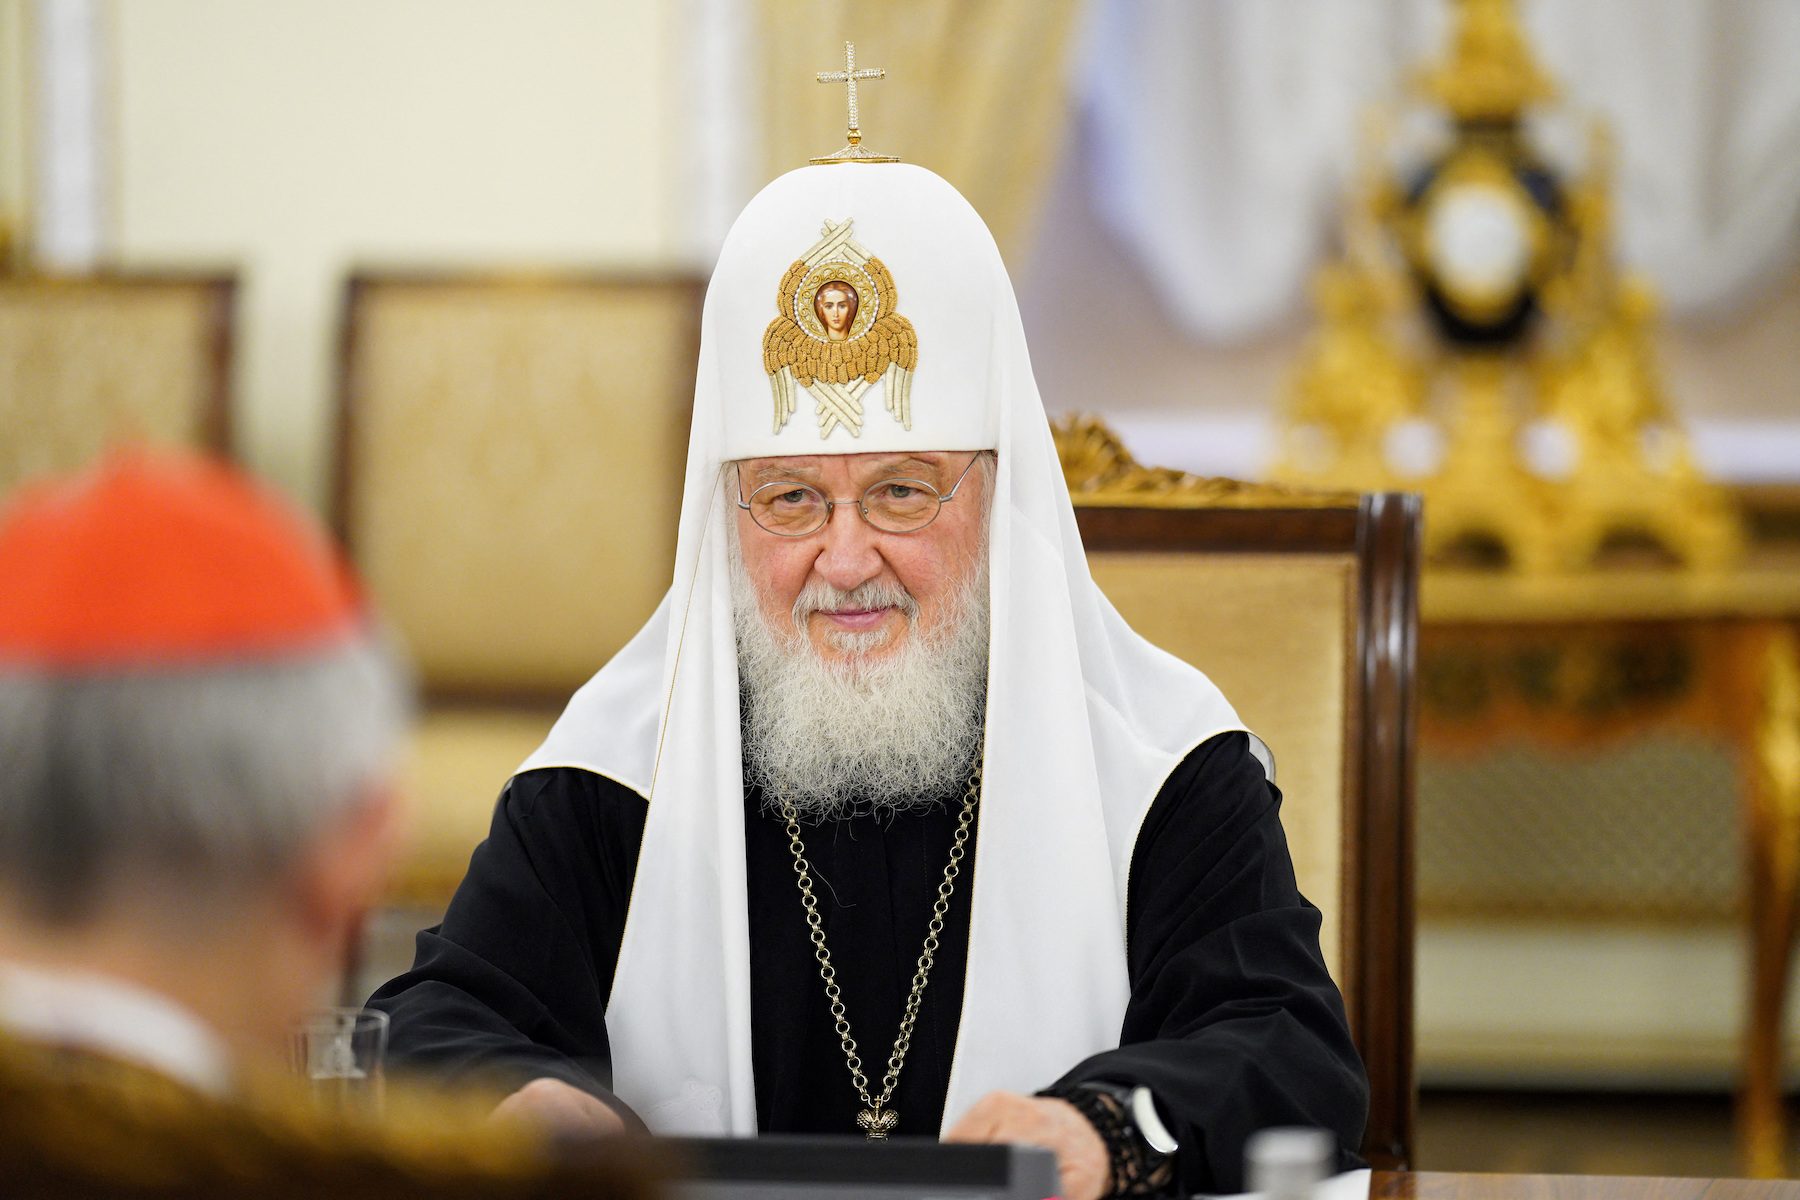 Russian patriarch tells papal envoy their Churches should work together for peace